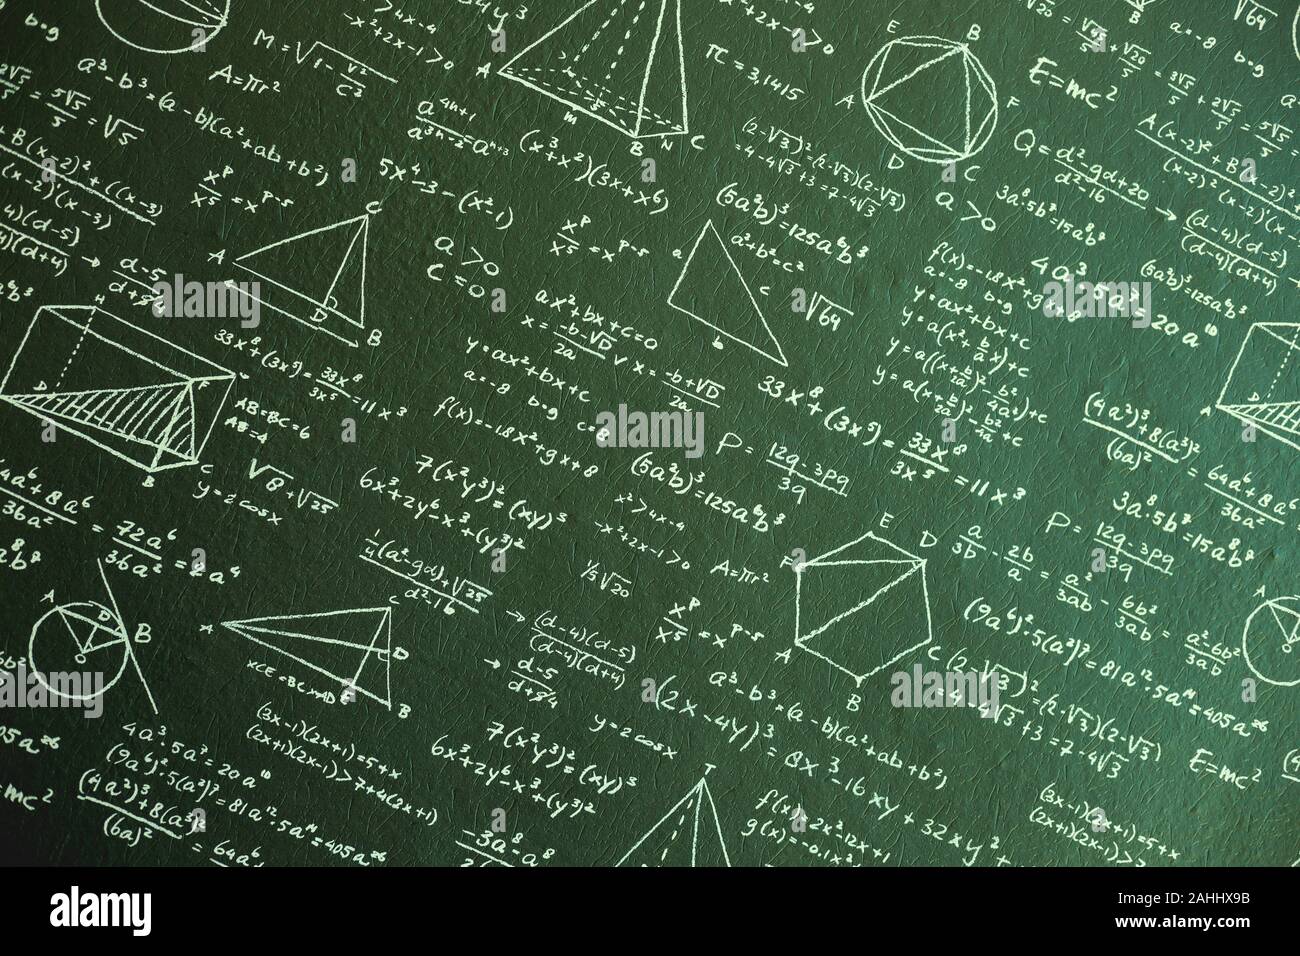 Download Detailed Physics Equations on a Whiteboard Wallpaper